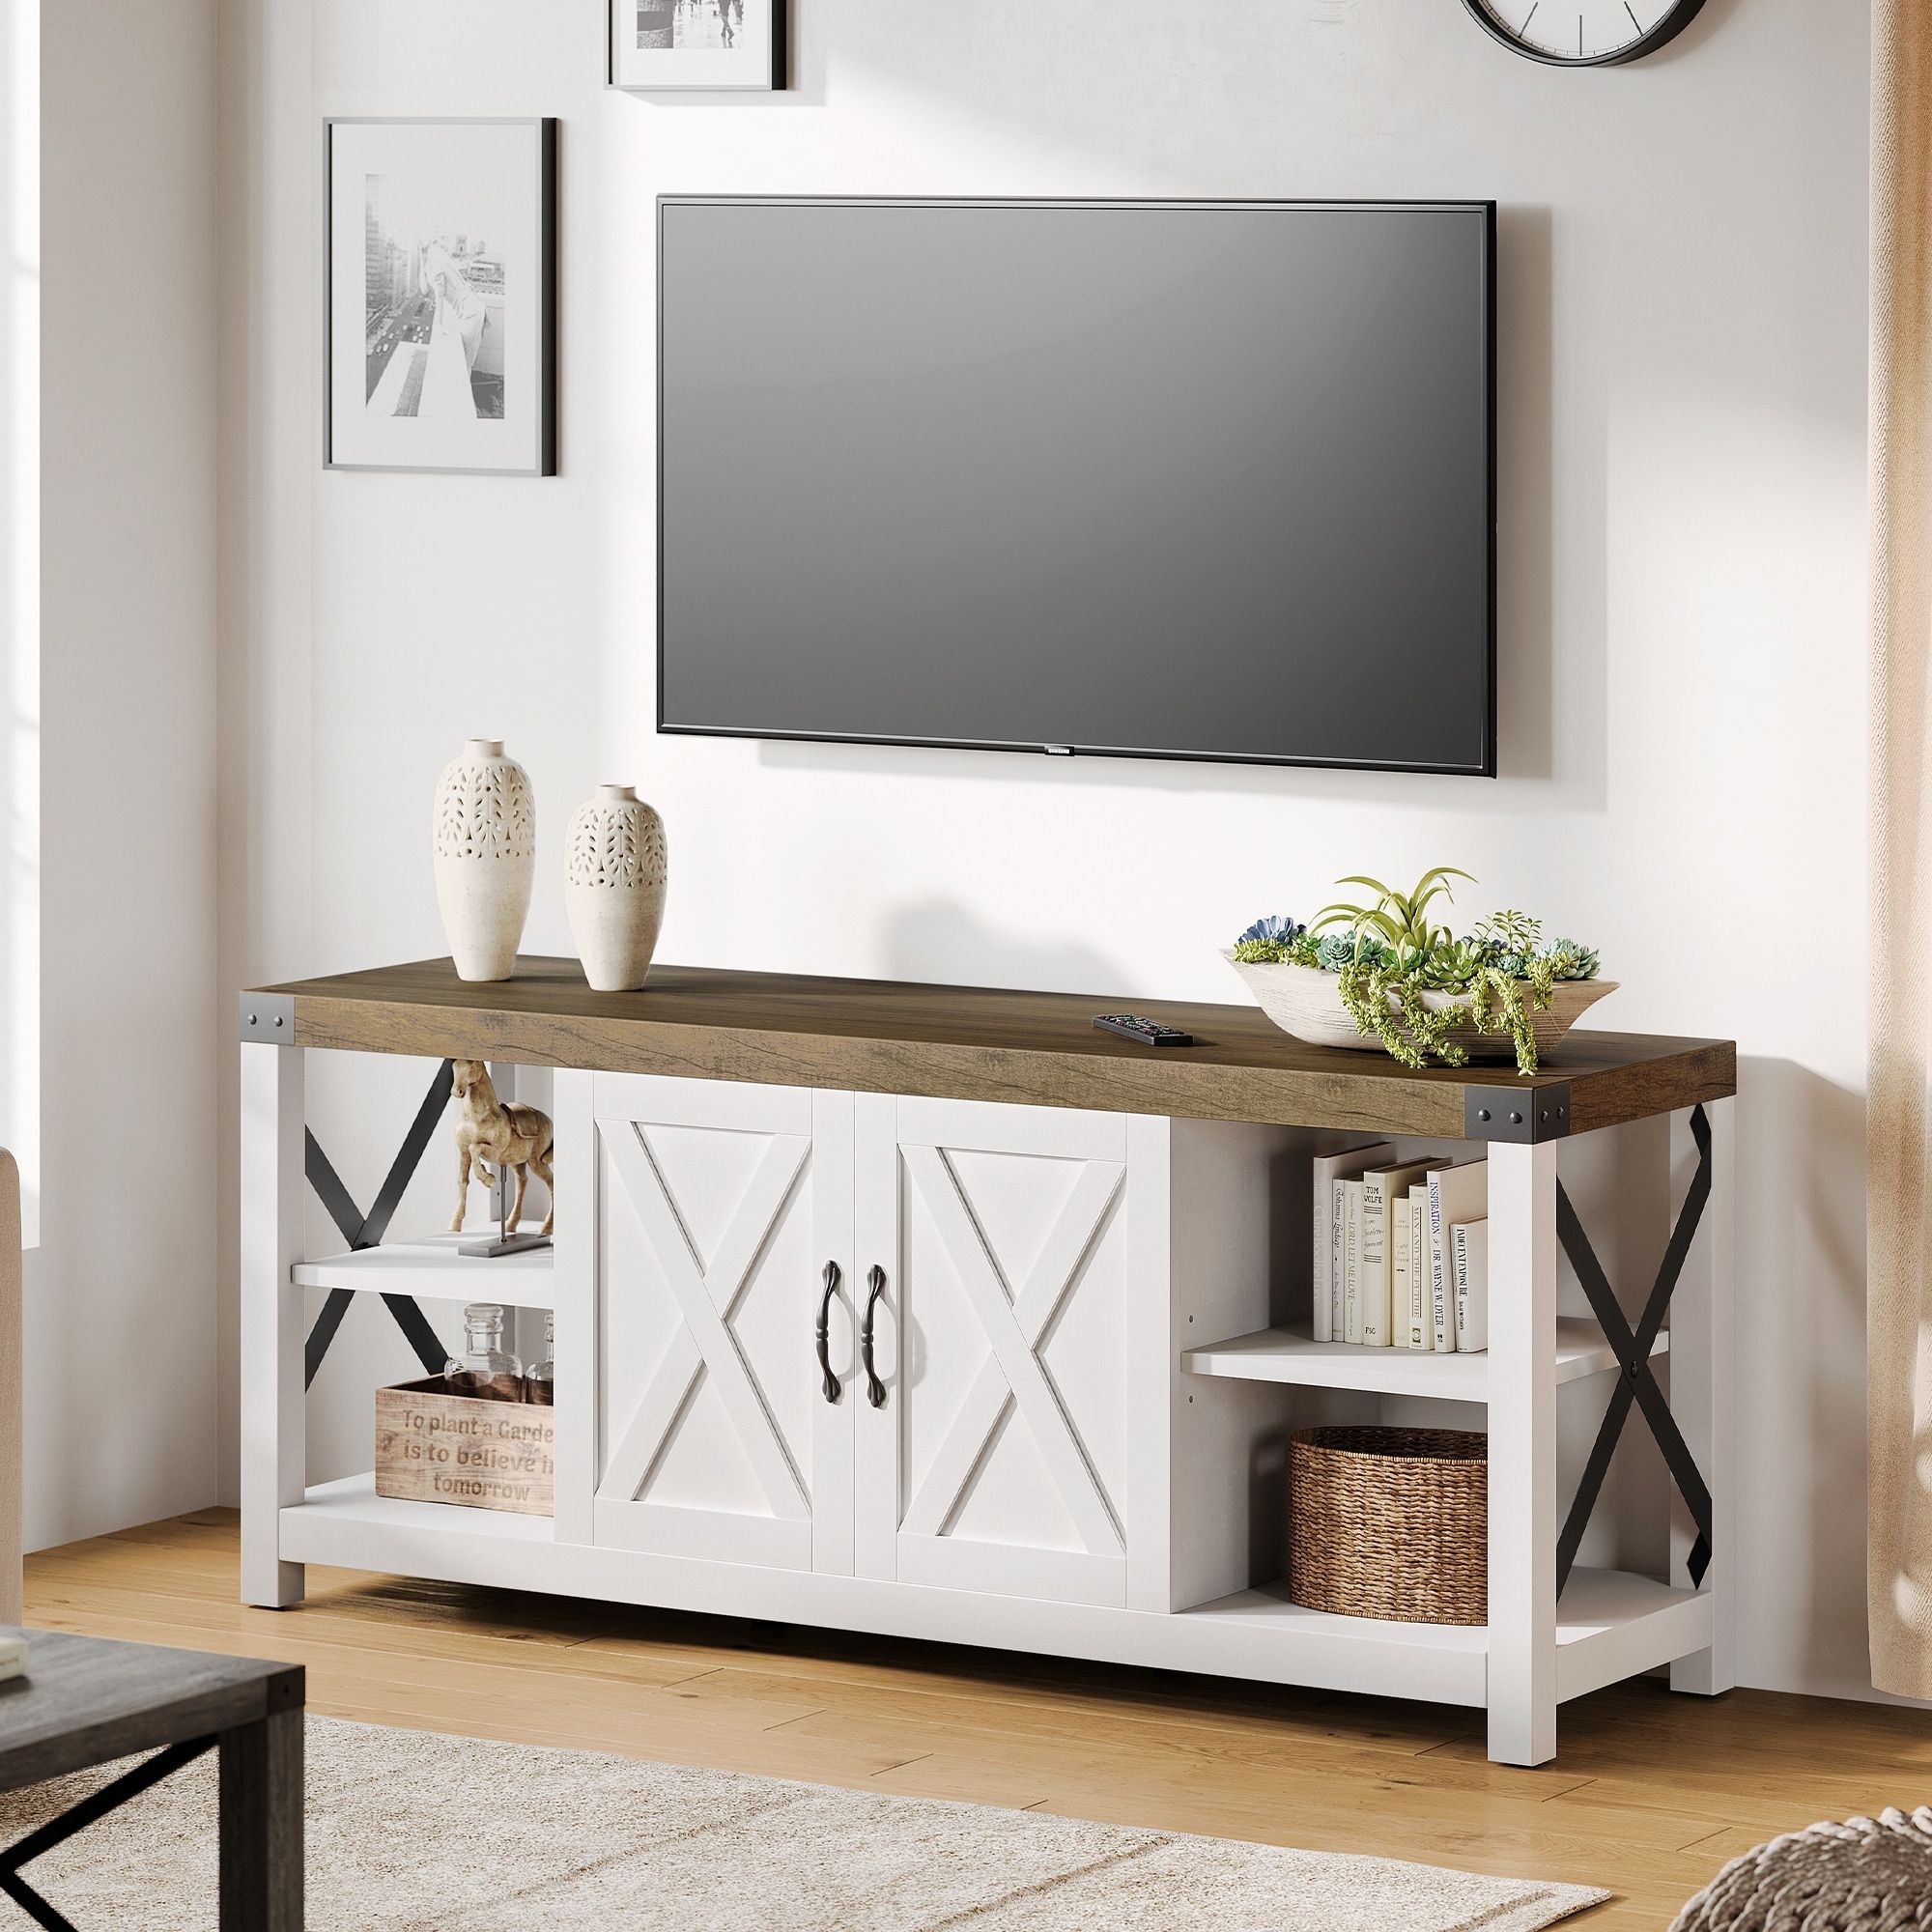 59 Inch Tv Stand For Tv Up To 50 60 65 Inches, Farmhouse Wood Tv Cabinet  Entertainment Center – 59" – On Sale – Bed Bath & Beyond – 36742172 Regarding Farmhouse Tv Stands (View 5 of 15)